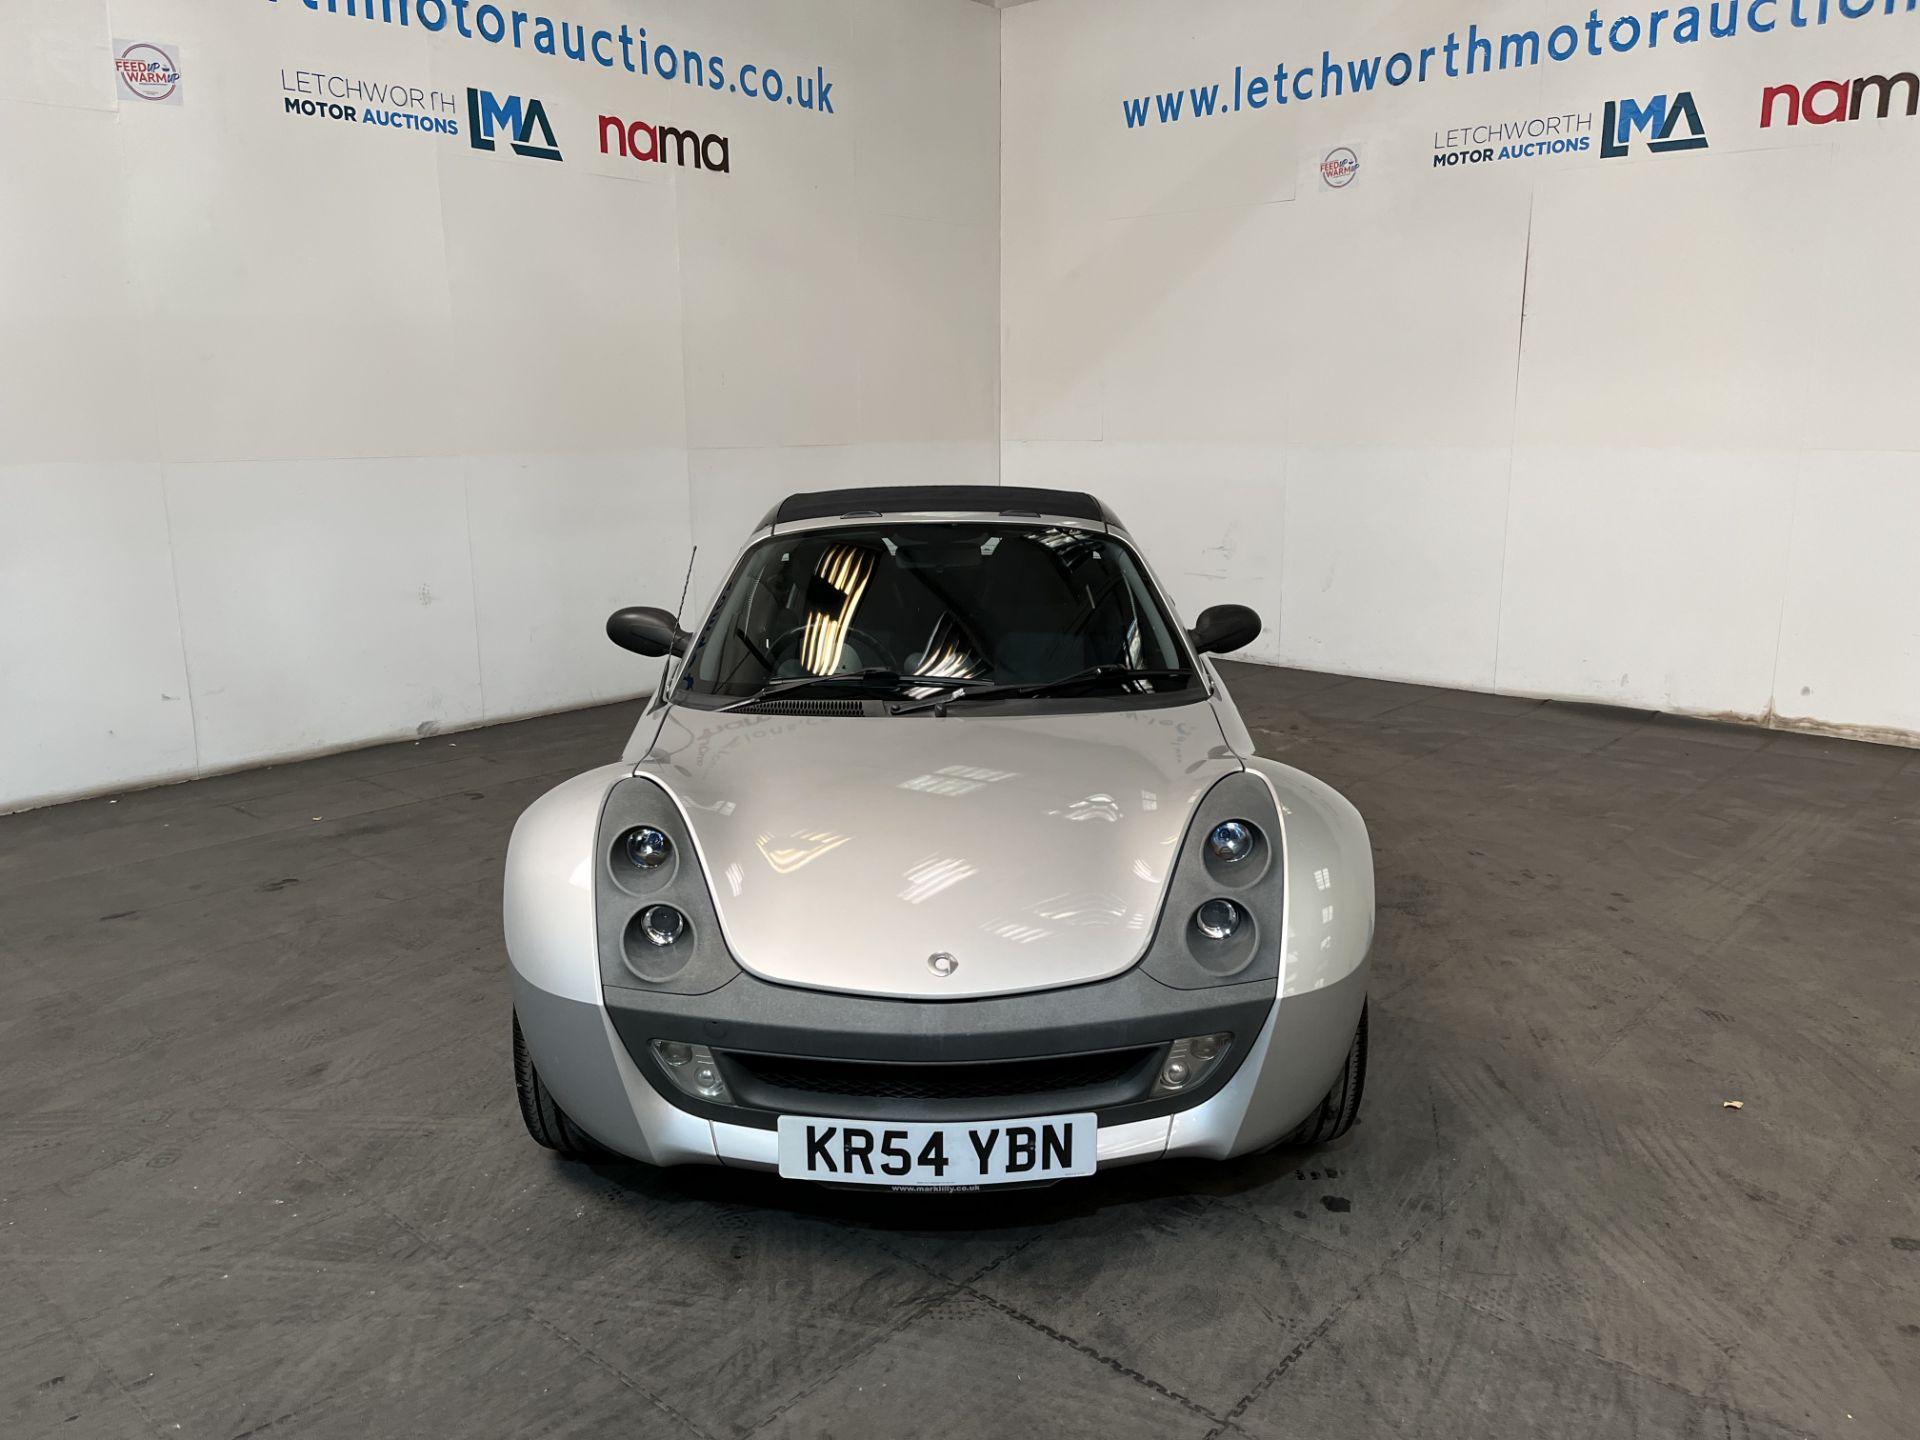 2004 Smart Roadster Speedsilver Auto - 698cc - Image 4 of 22